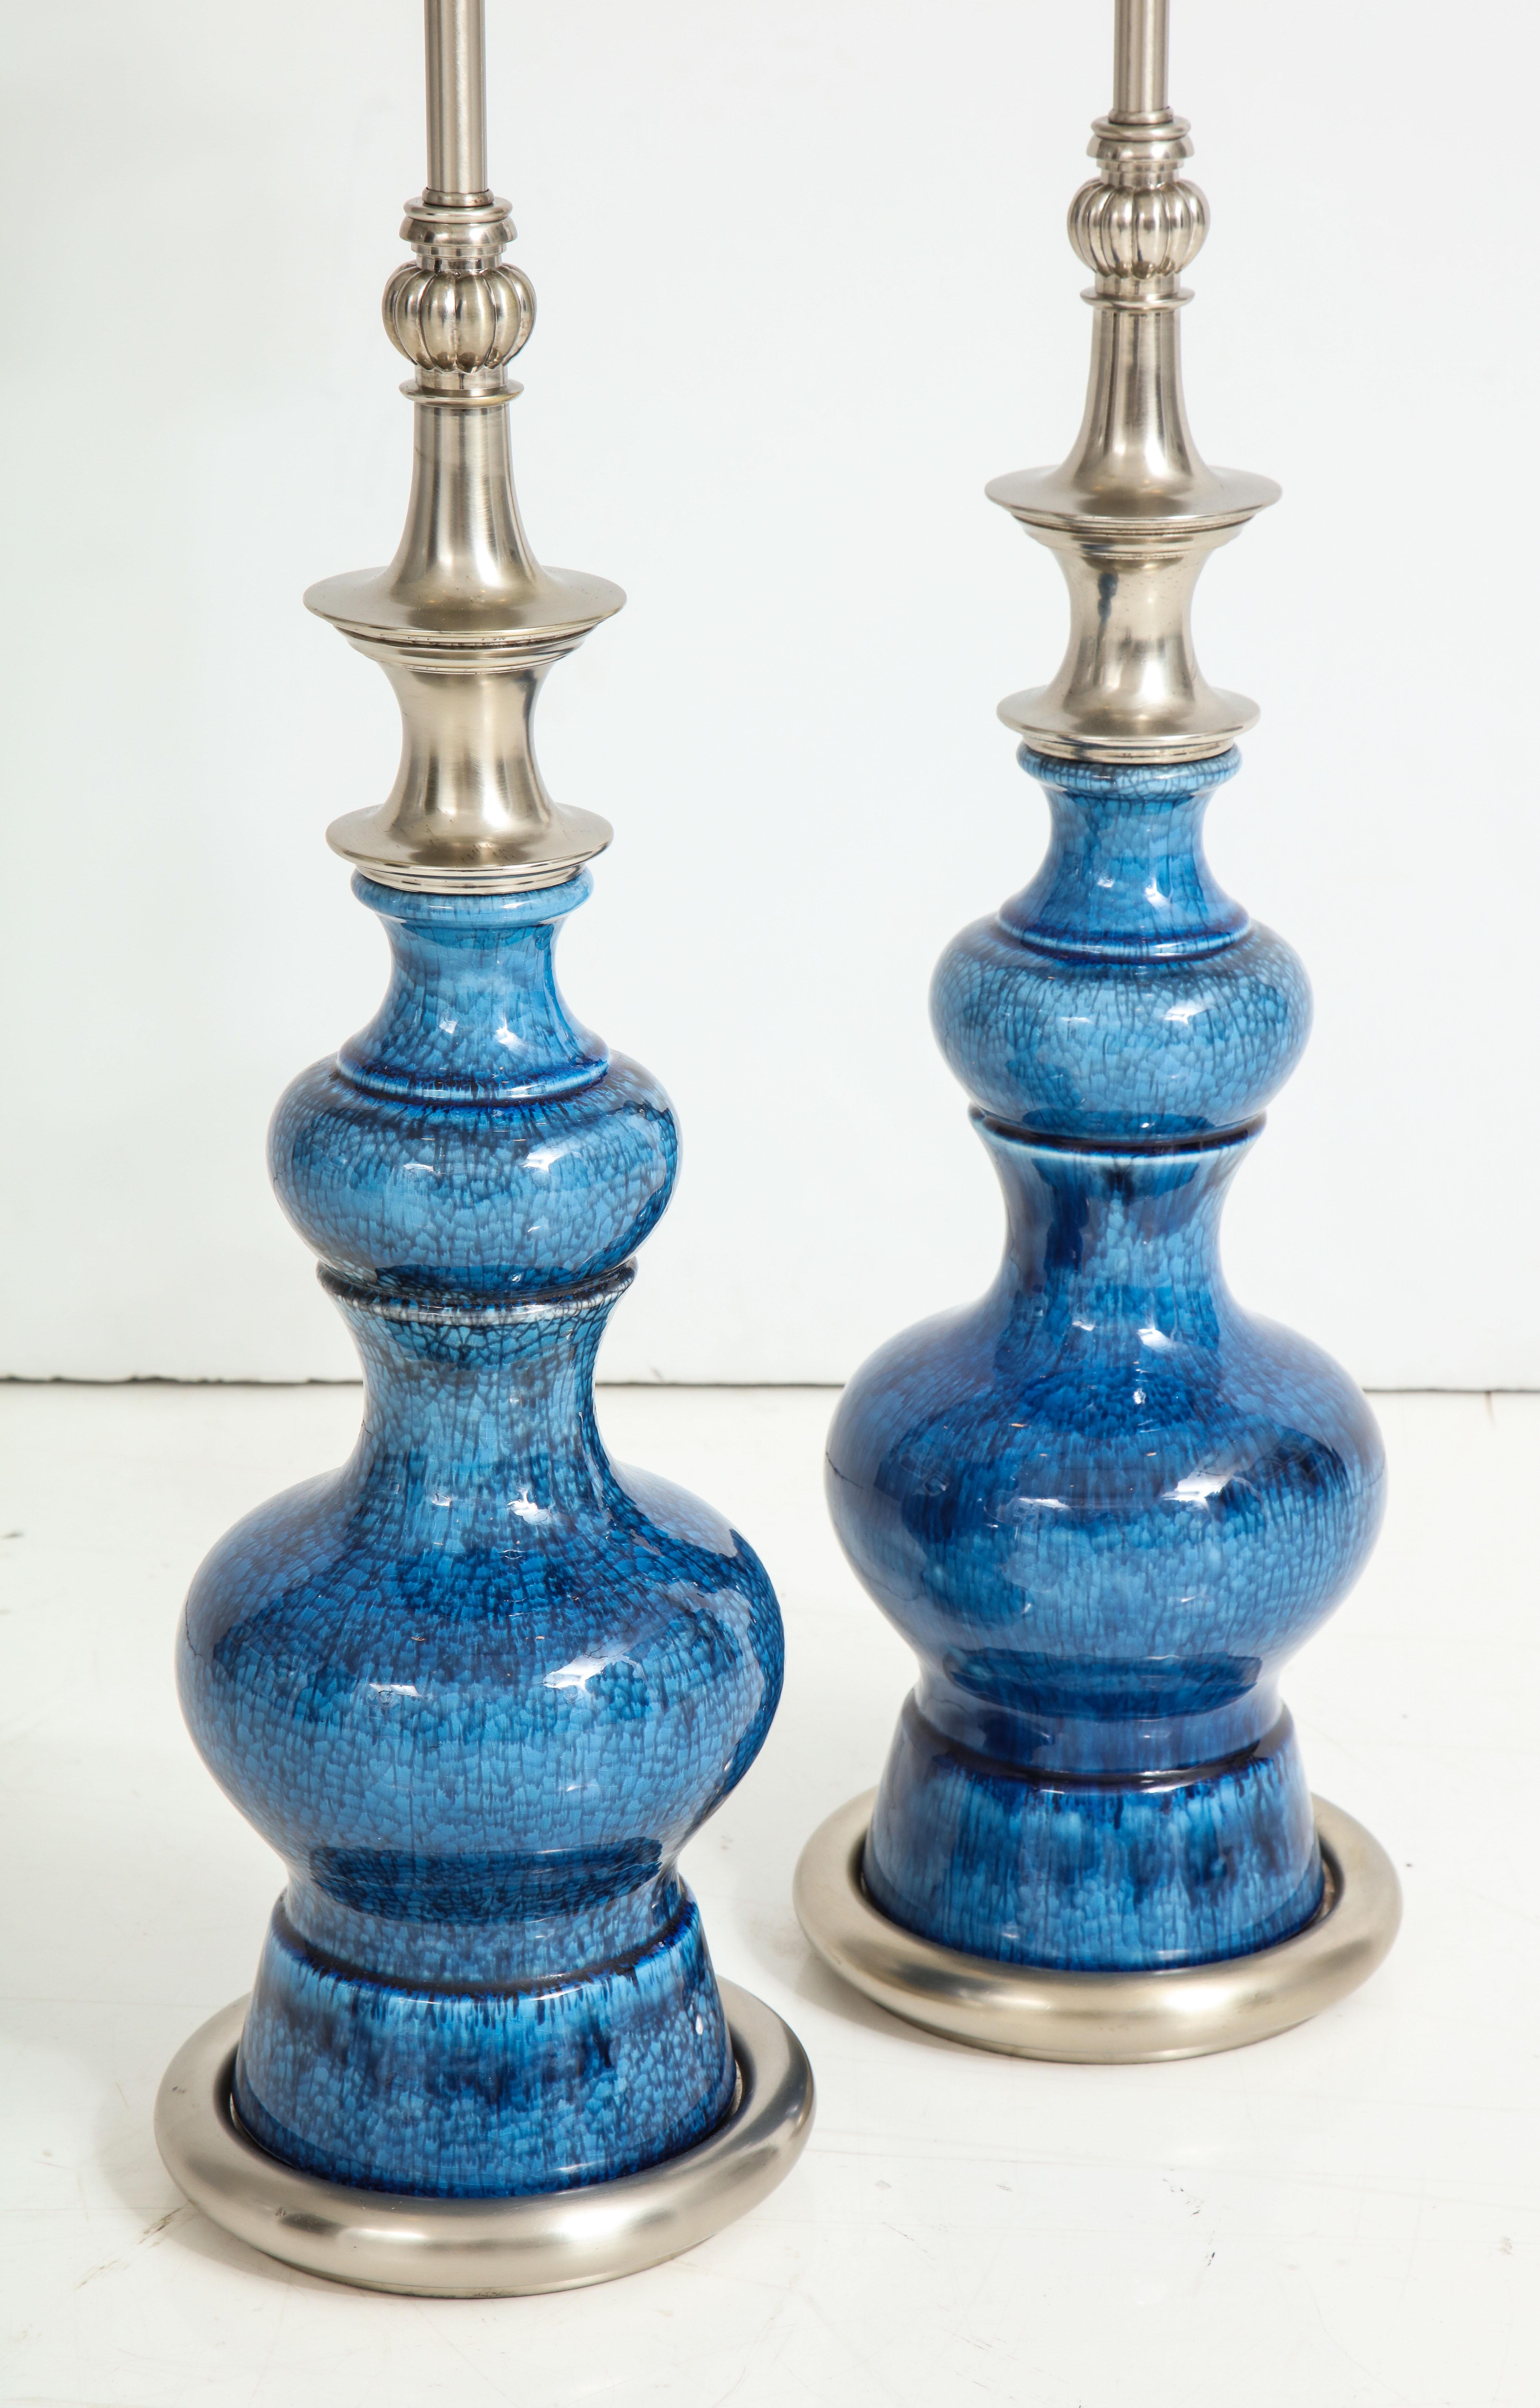 American Pair of Stiffel Blue Crackle Glazed Lamps